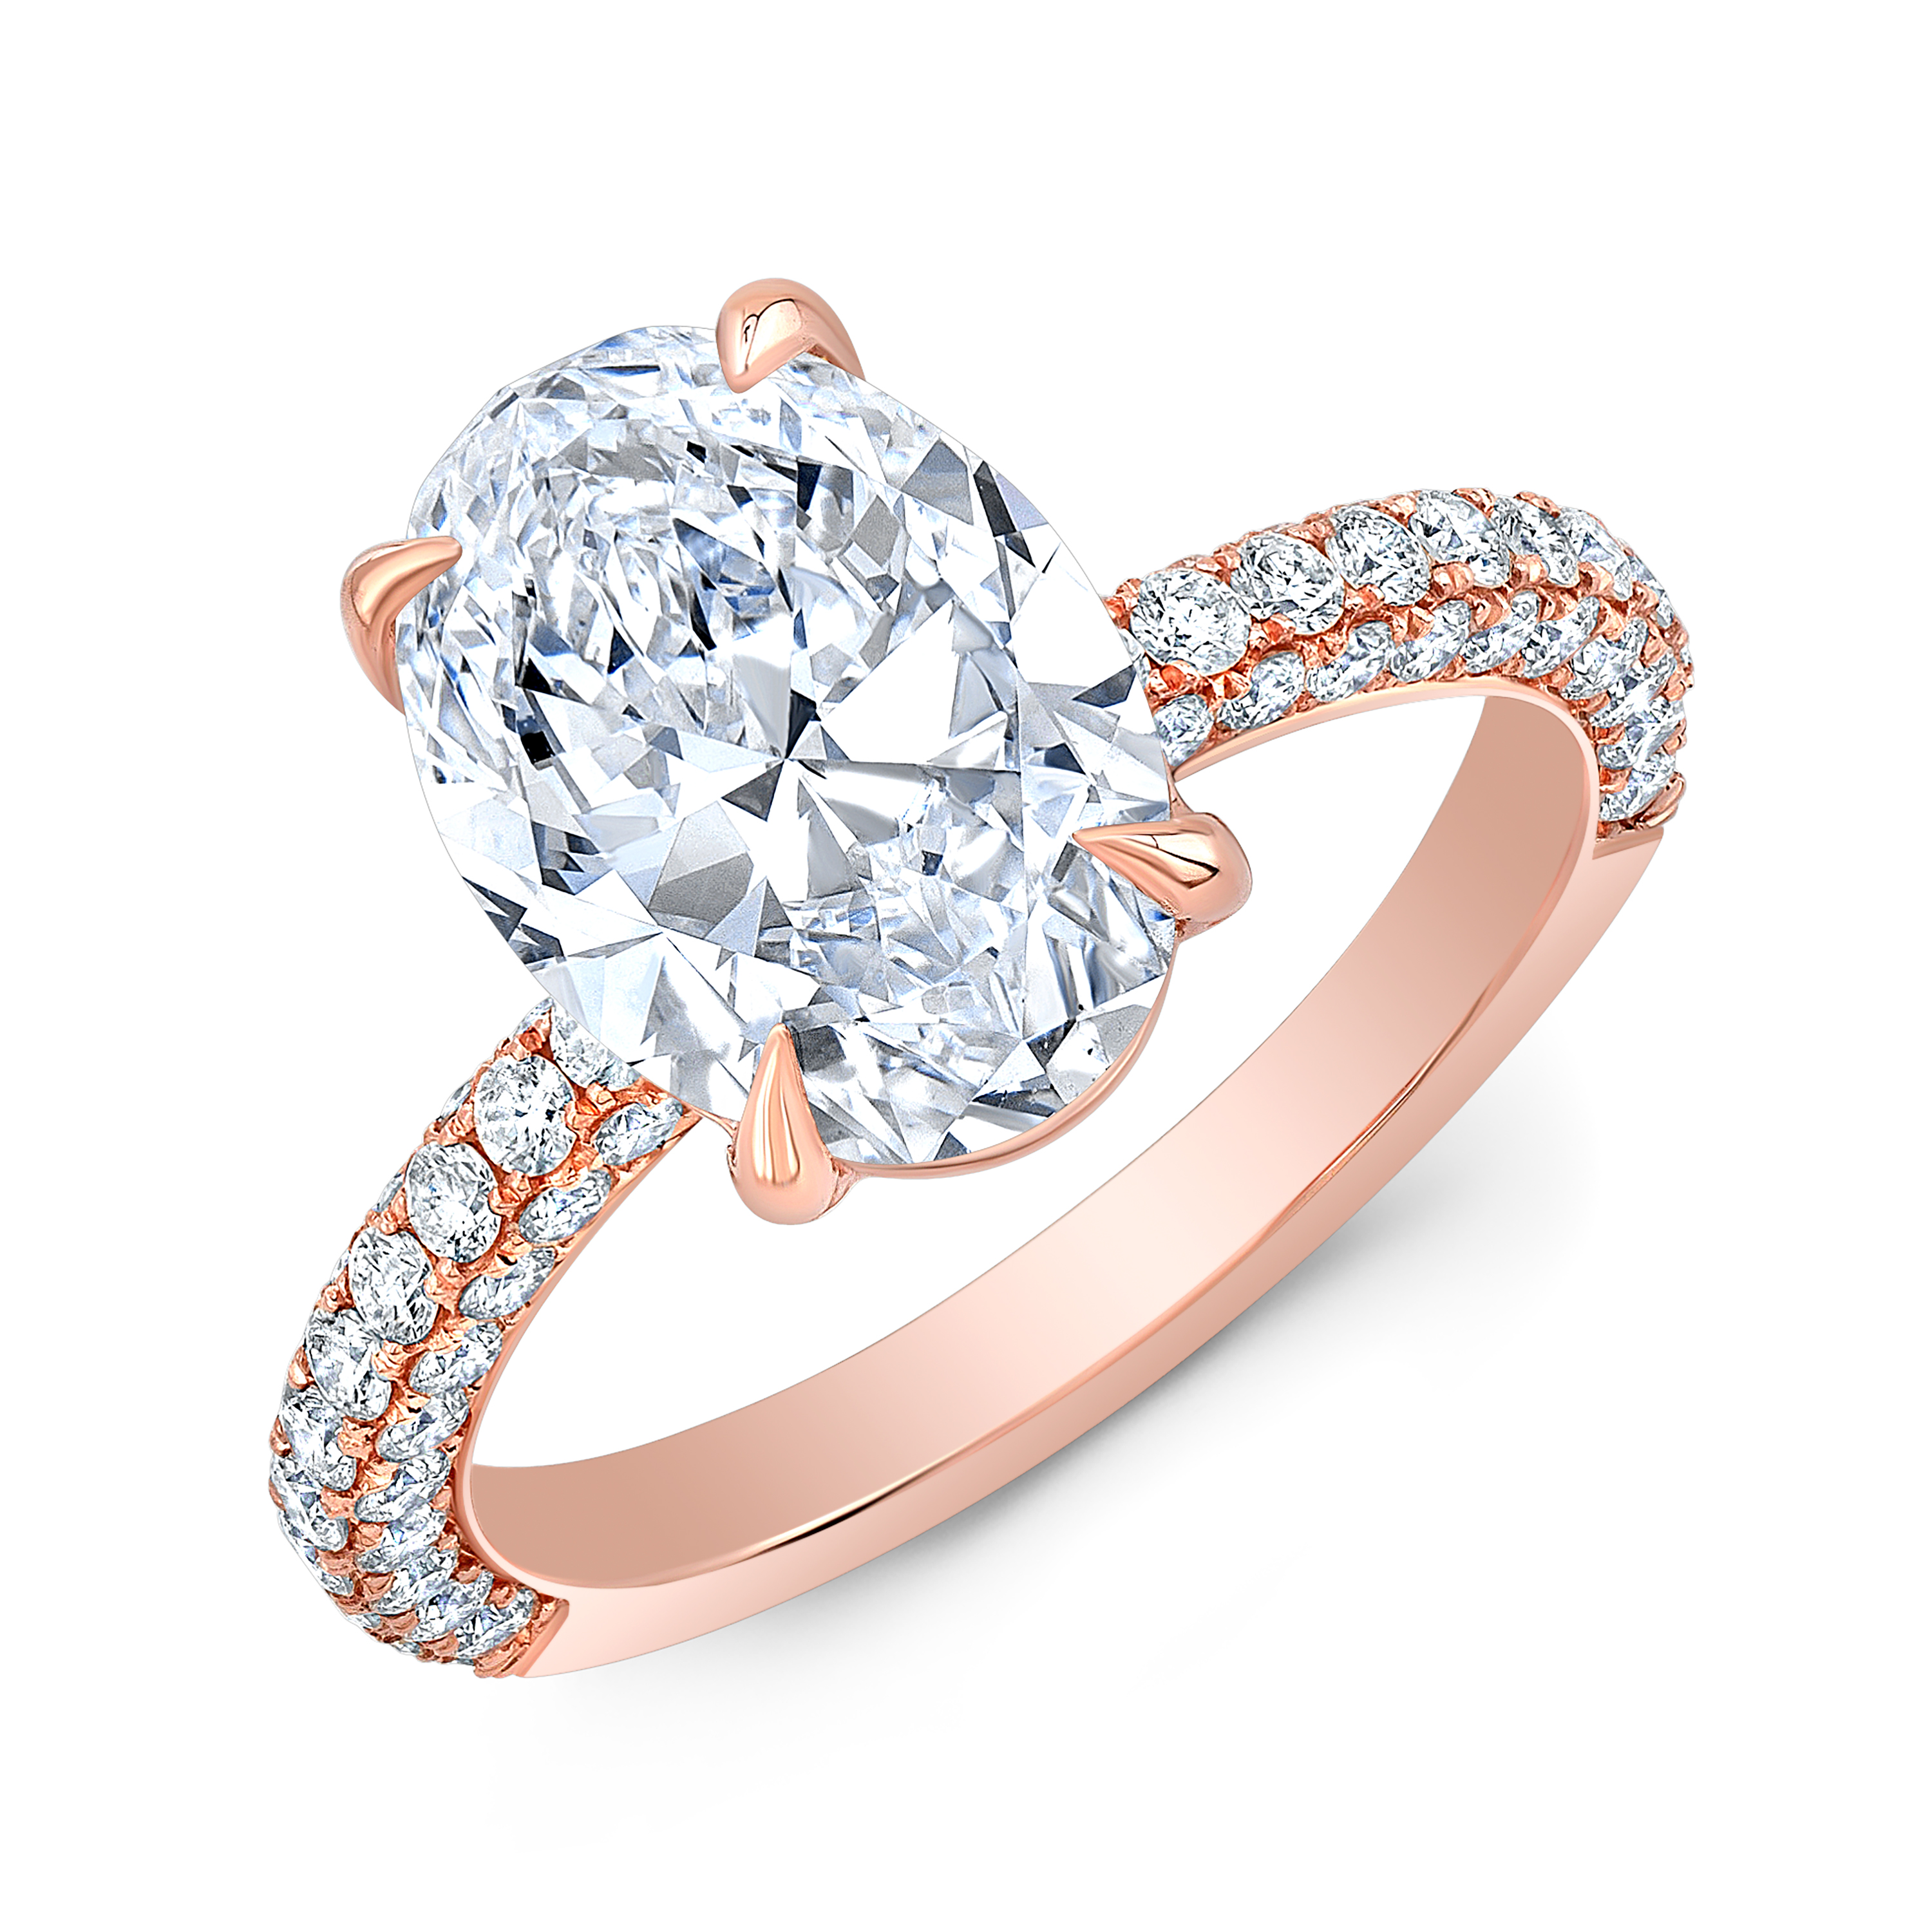 Natural 3 Row Micro Pave Diamond Engagement Ring in rose gold 